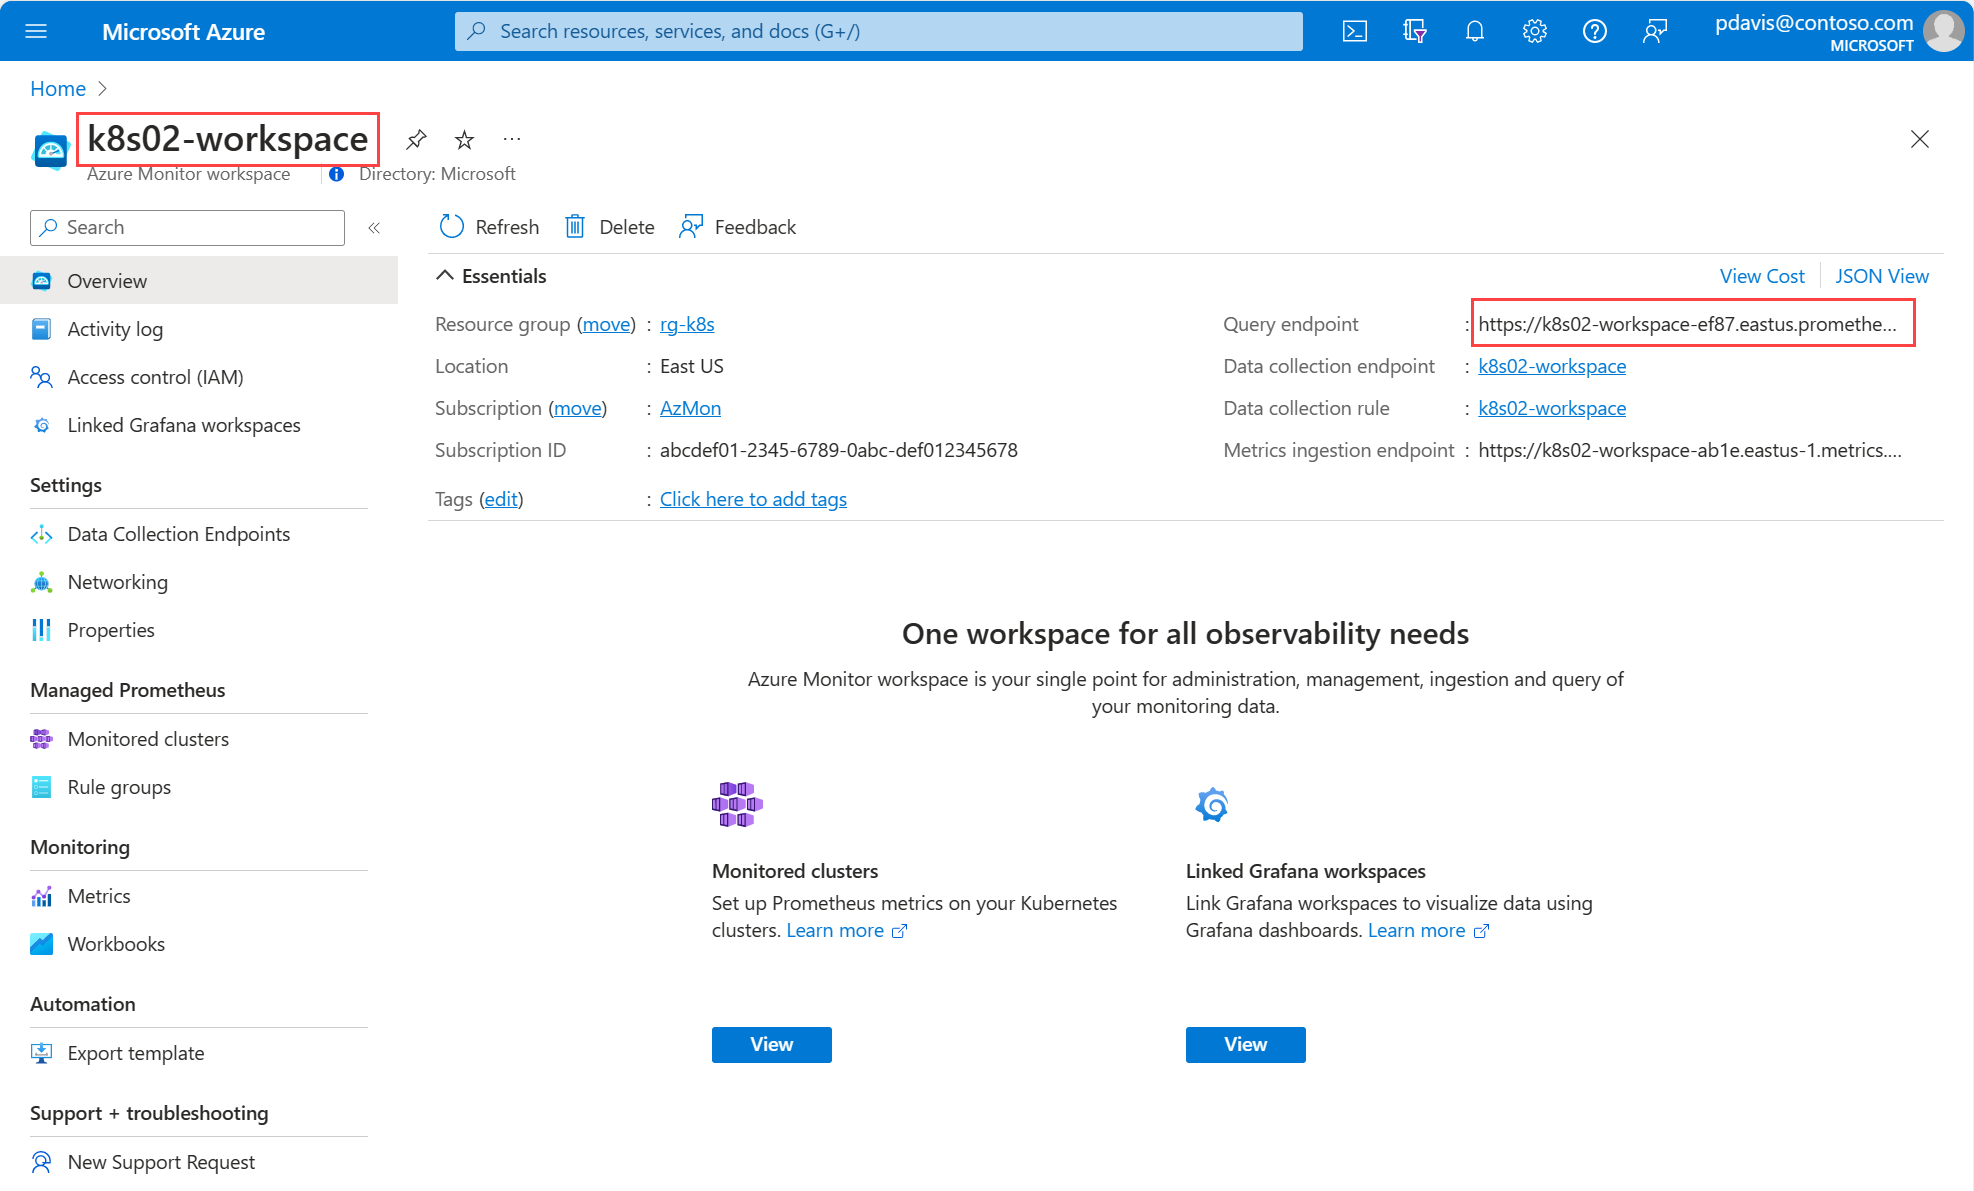 A screenshot showing an Azure Monitor workspace overview page.